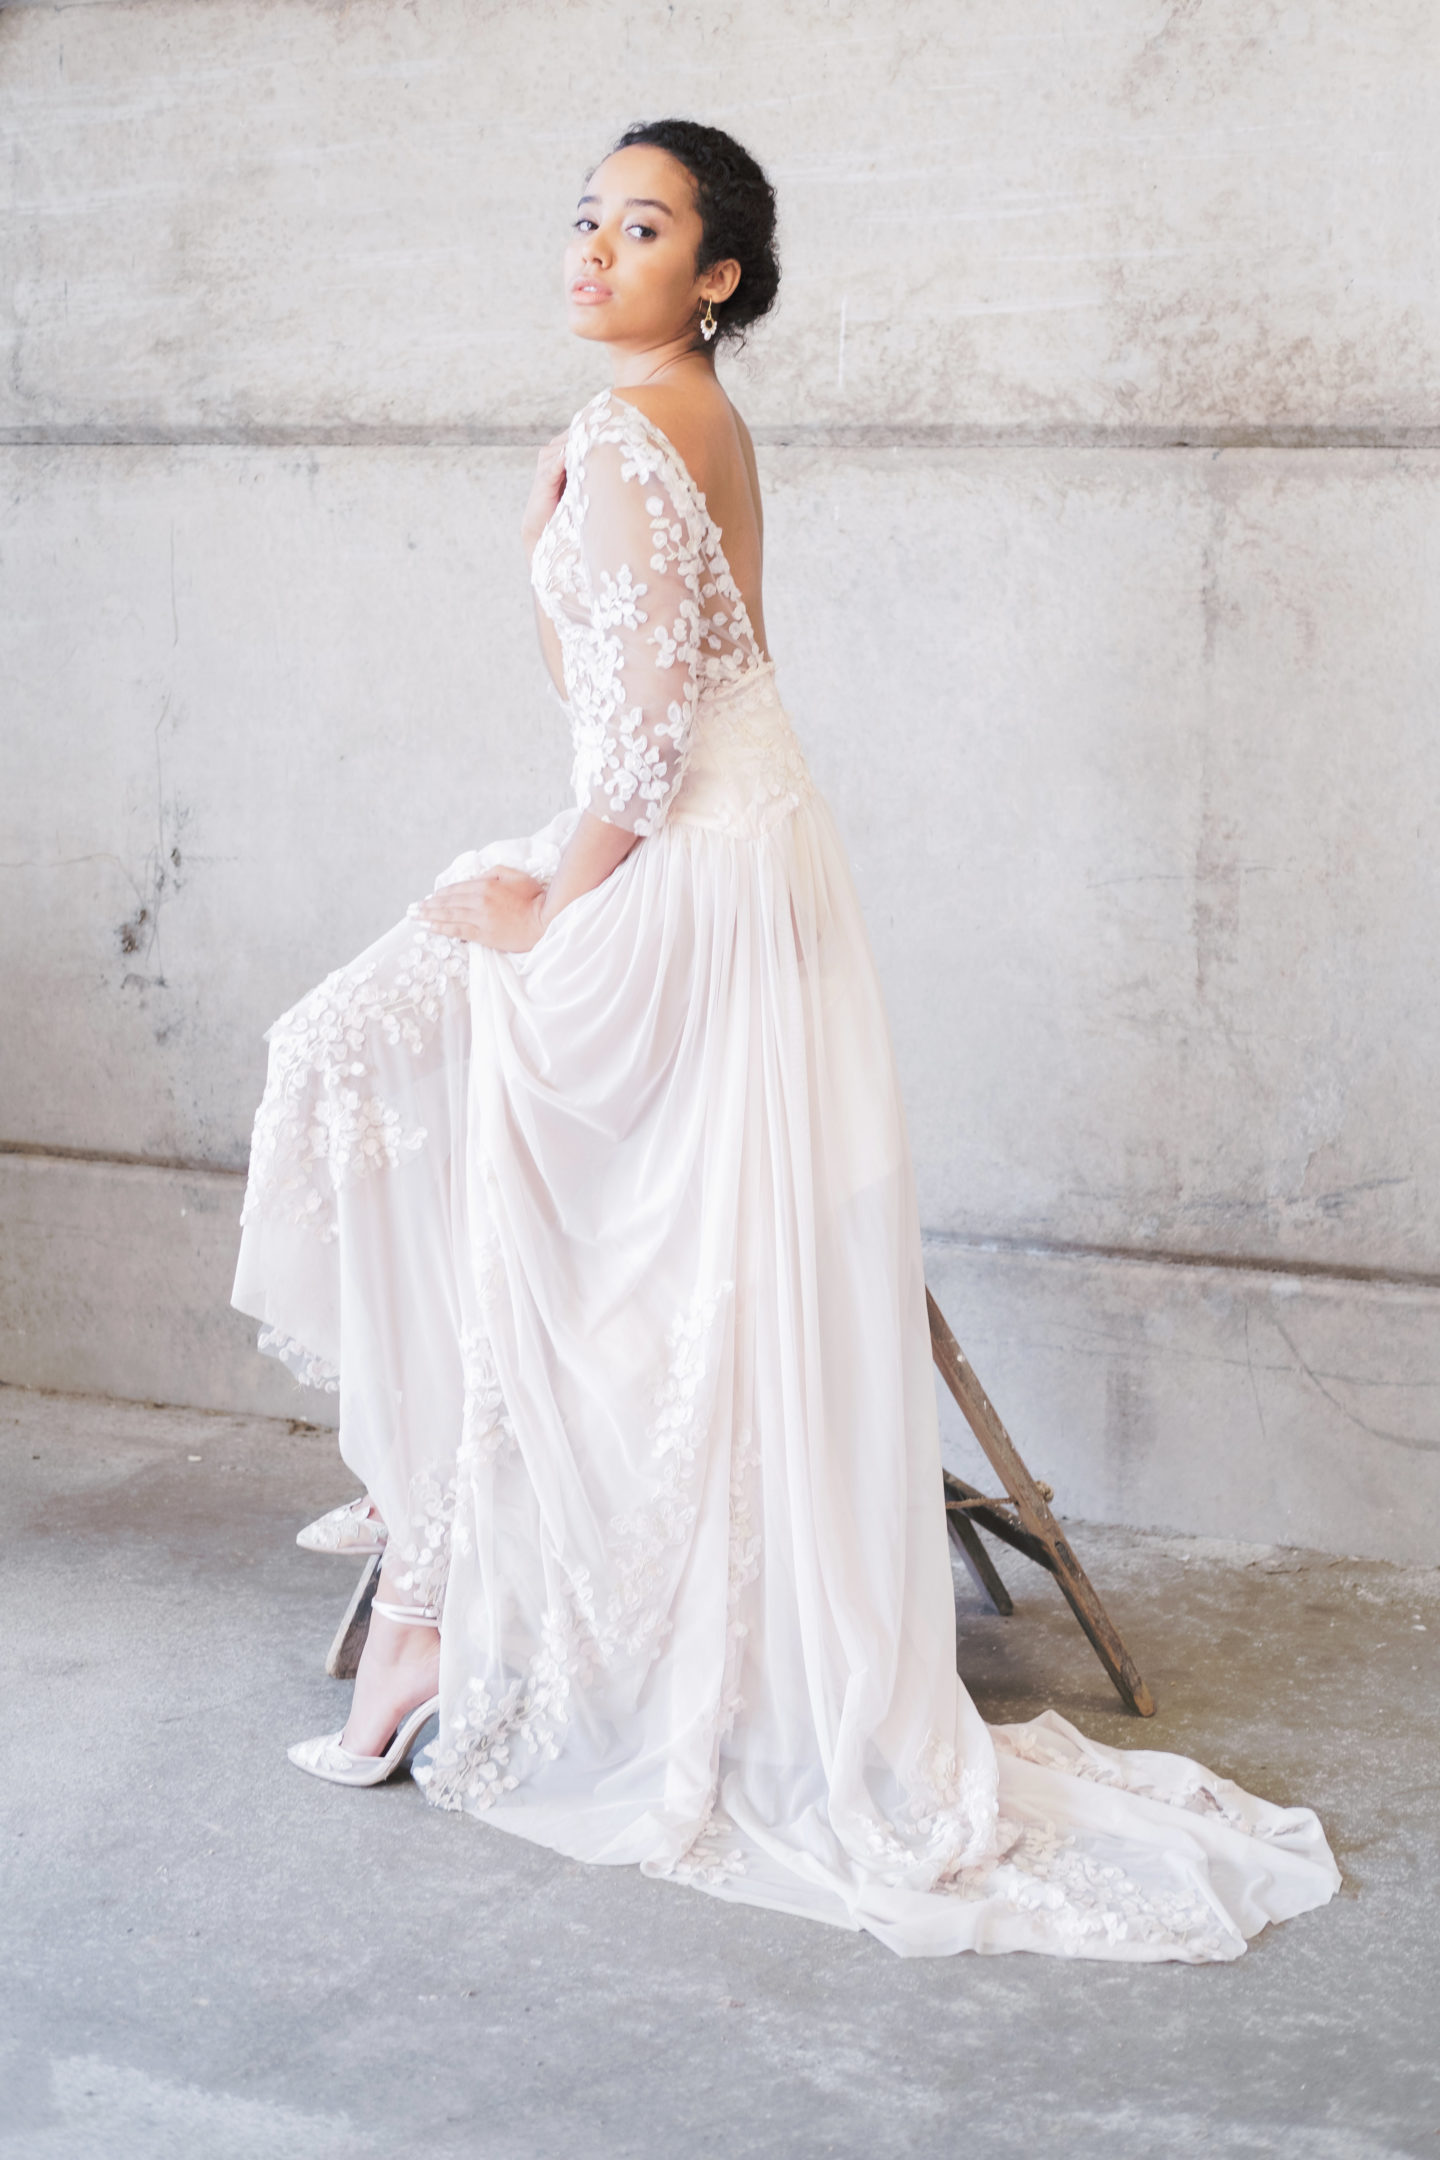 2021 Bridal Trends; Top 5 New Year Trends With Wedding Dress Designer Kate Edmonson